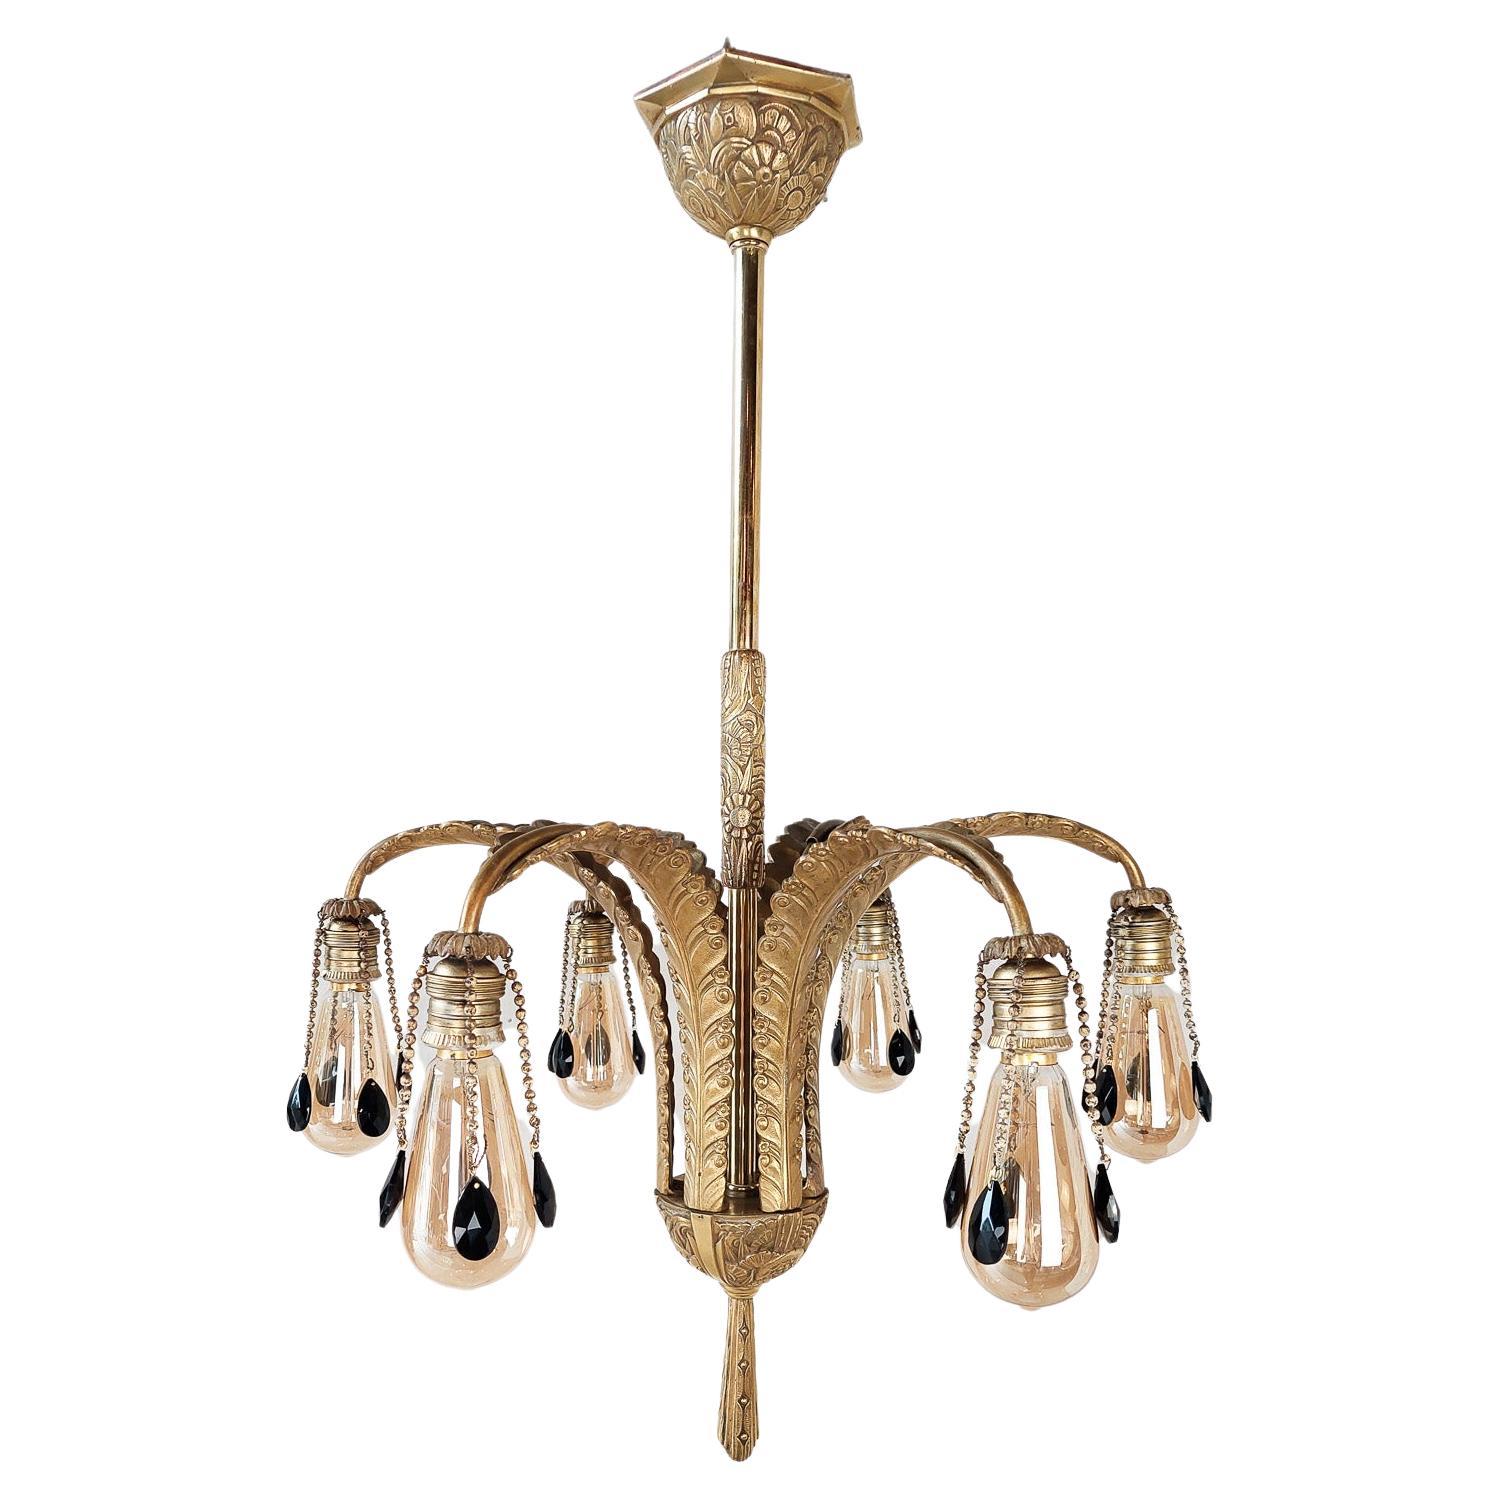 Midcentury Brass Chandelier with Feather Shaped Arms and Black Pearls